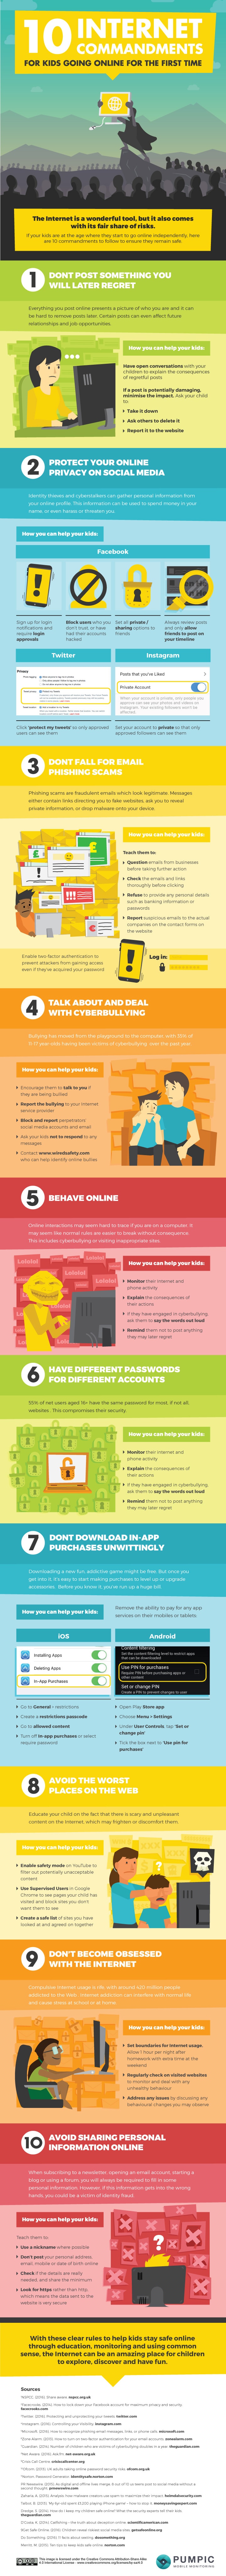 10-Internet-Commandments-for-Kids-Going-Online-for-First-Time